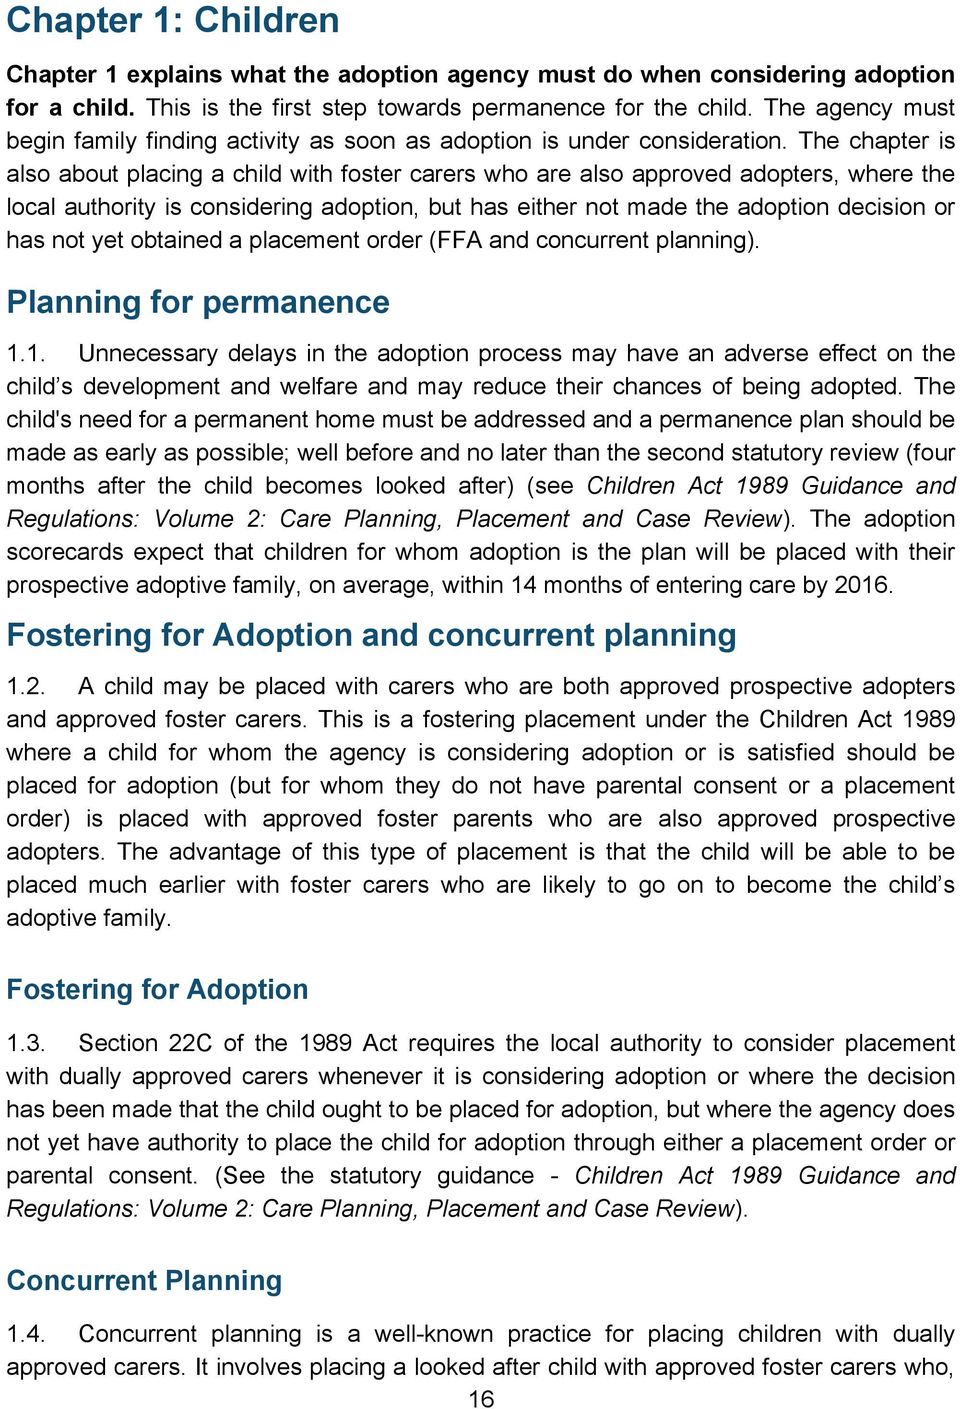 The chapter is also about placing a child with foster carers who are also approved adopters, where the local authority is considering adoption, but has either not made the adoption decision or has